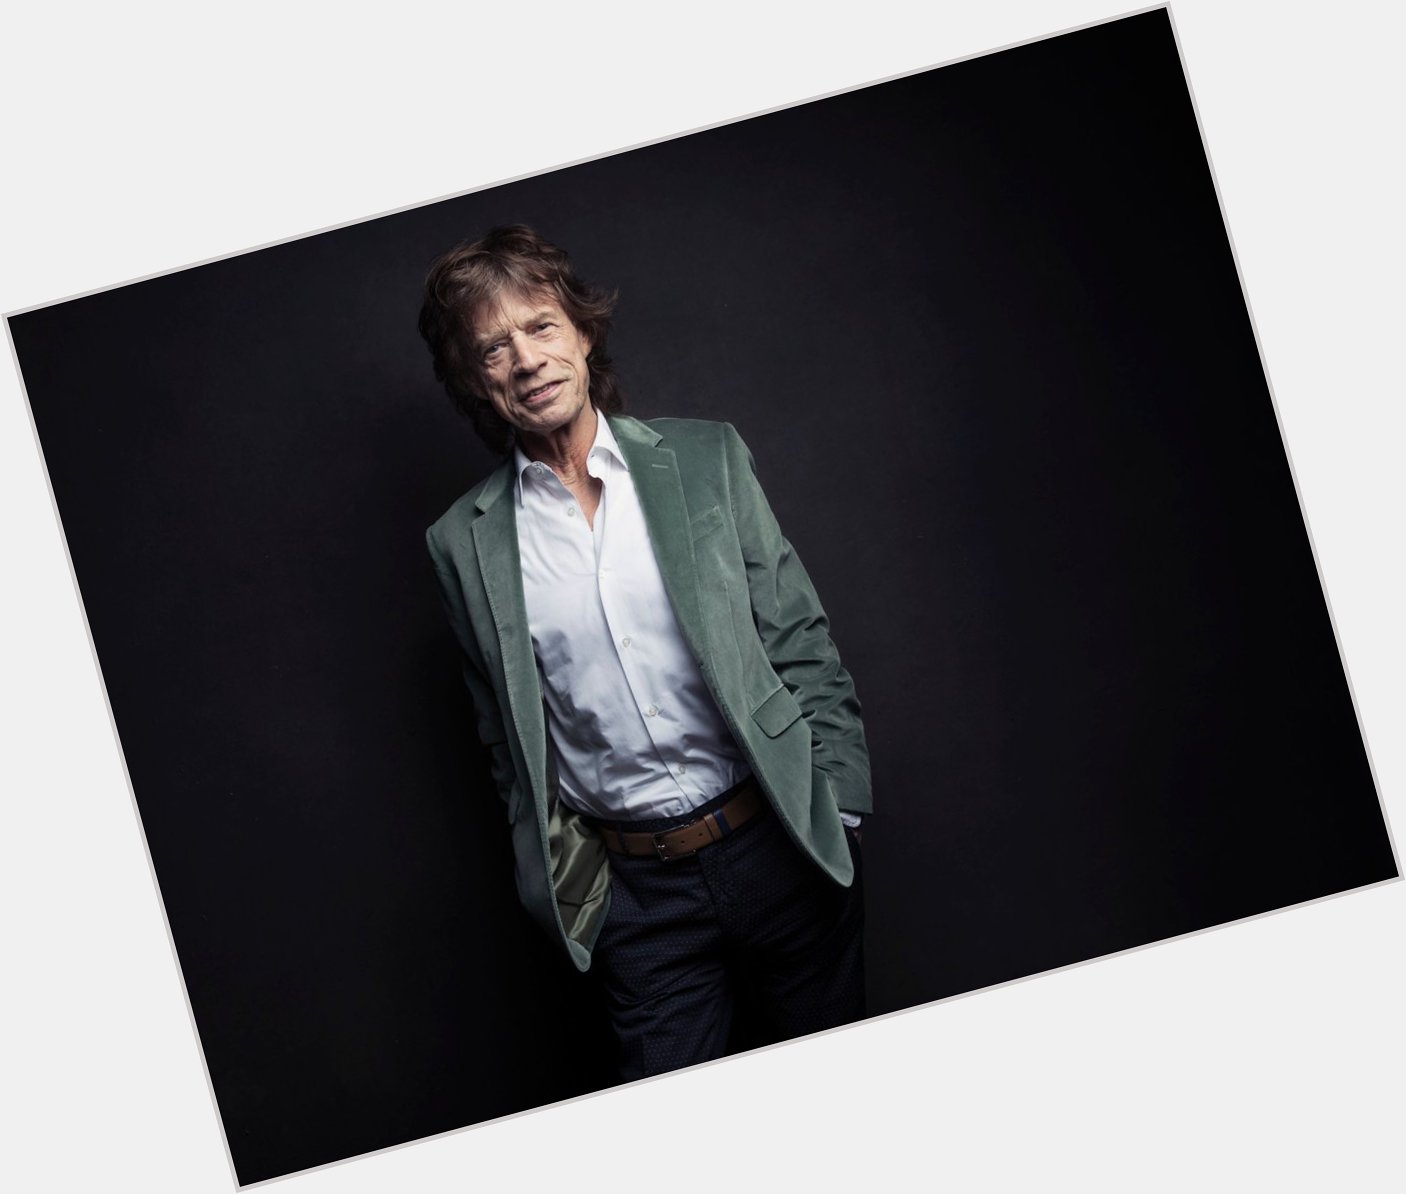 Happy Birthday \Mick Jagger\
Band: The Rolling Stones
Age: 76 